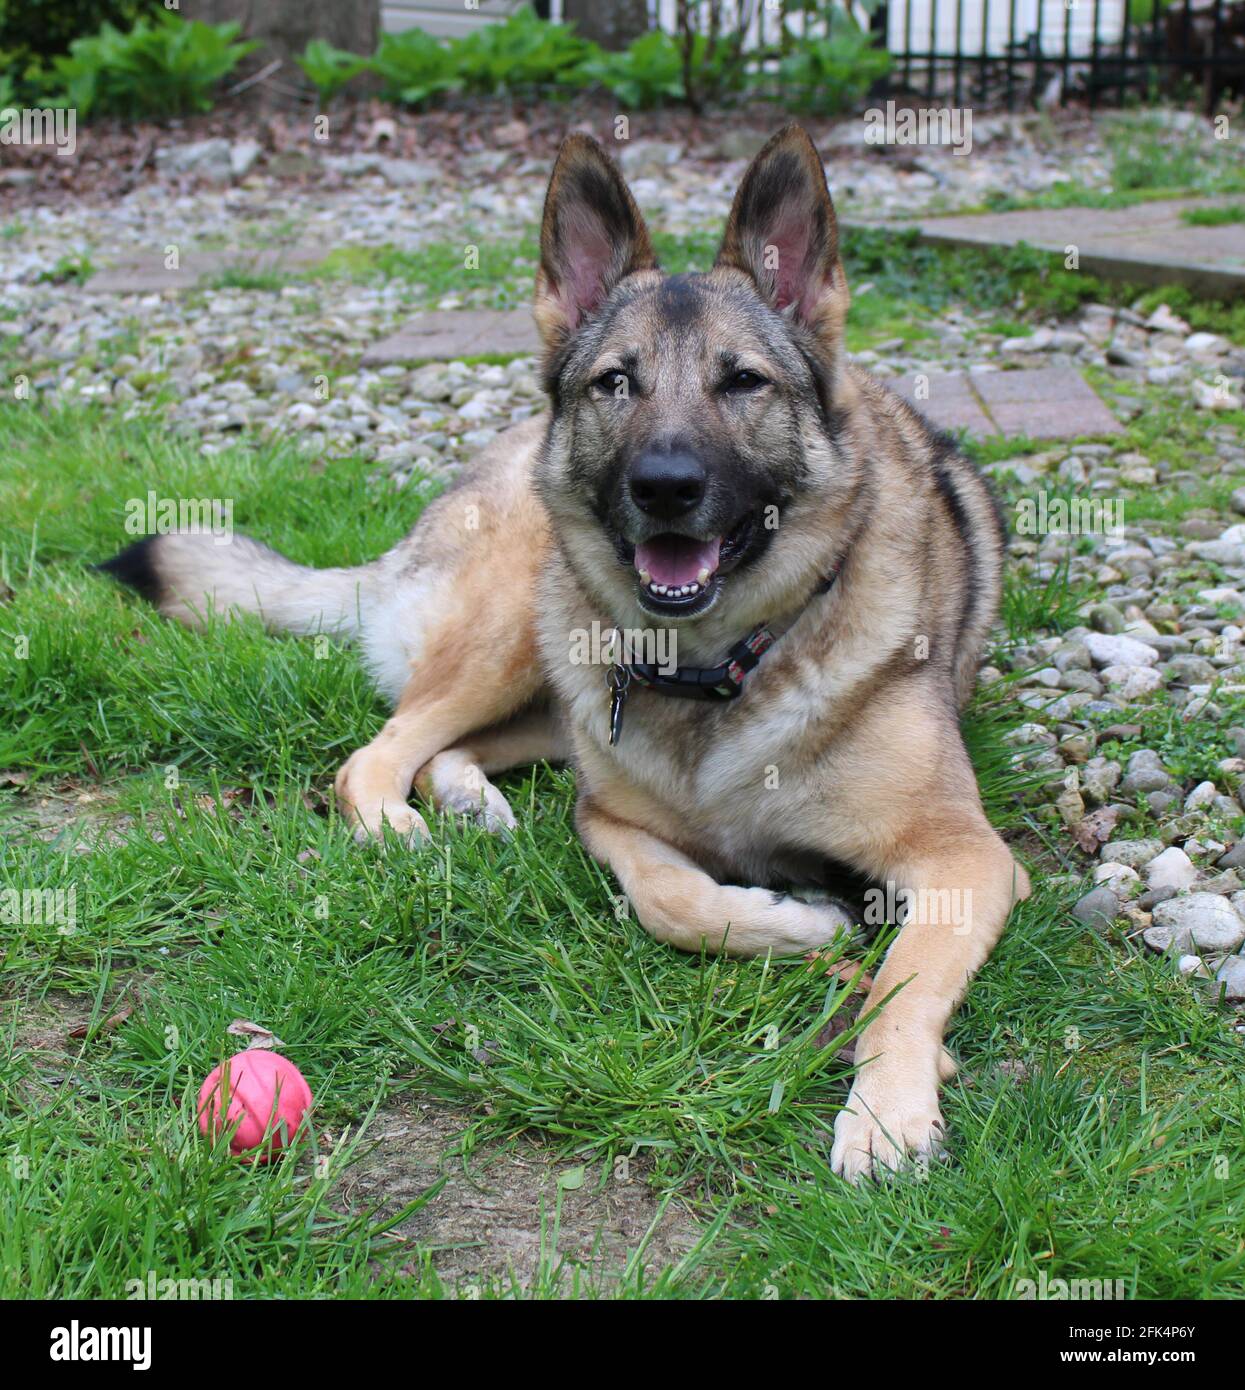 A German Shepherd Dog Laying Down Next to a Pink Ball Stock Photo